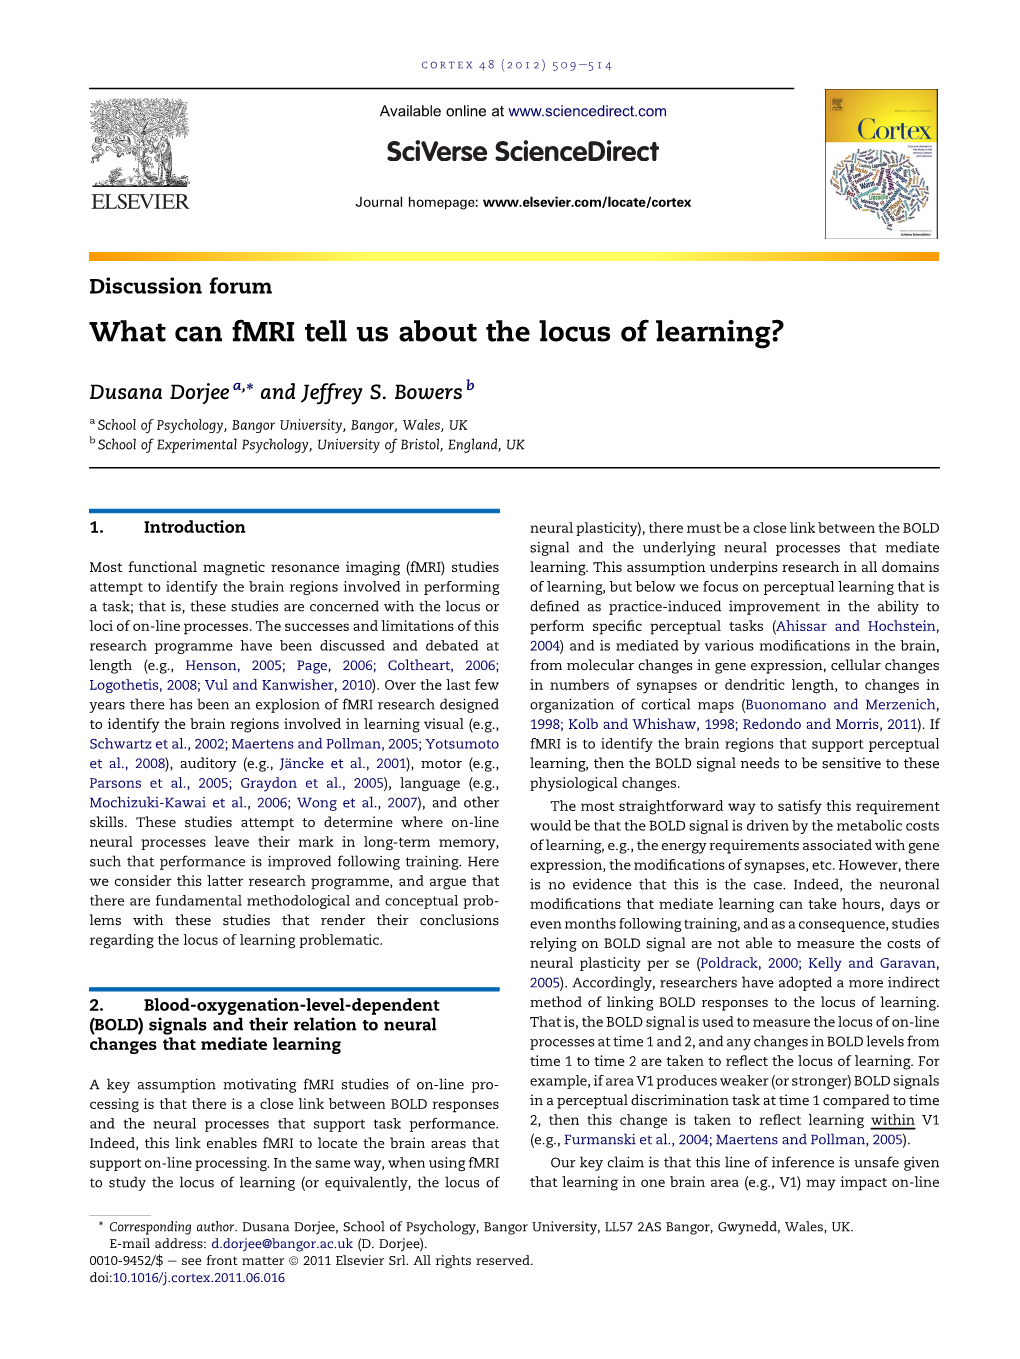 What Can Fmri Tell Us About the Locus of Learning?